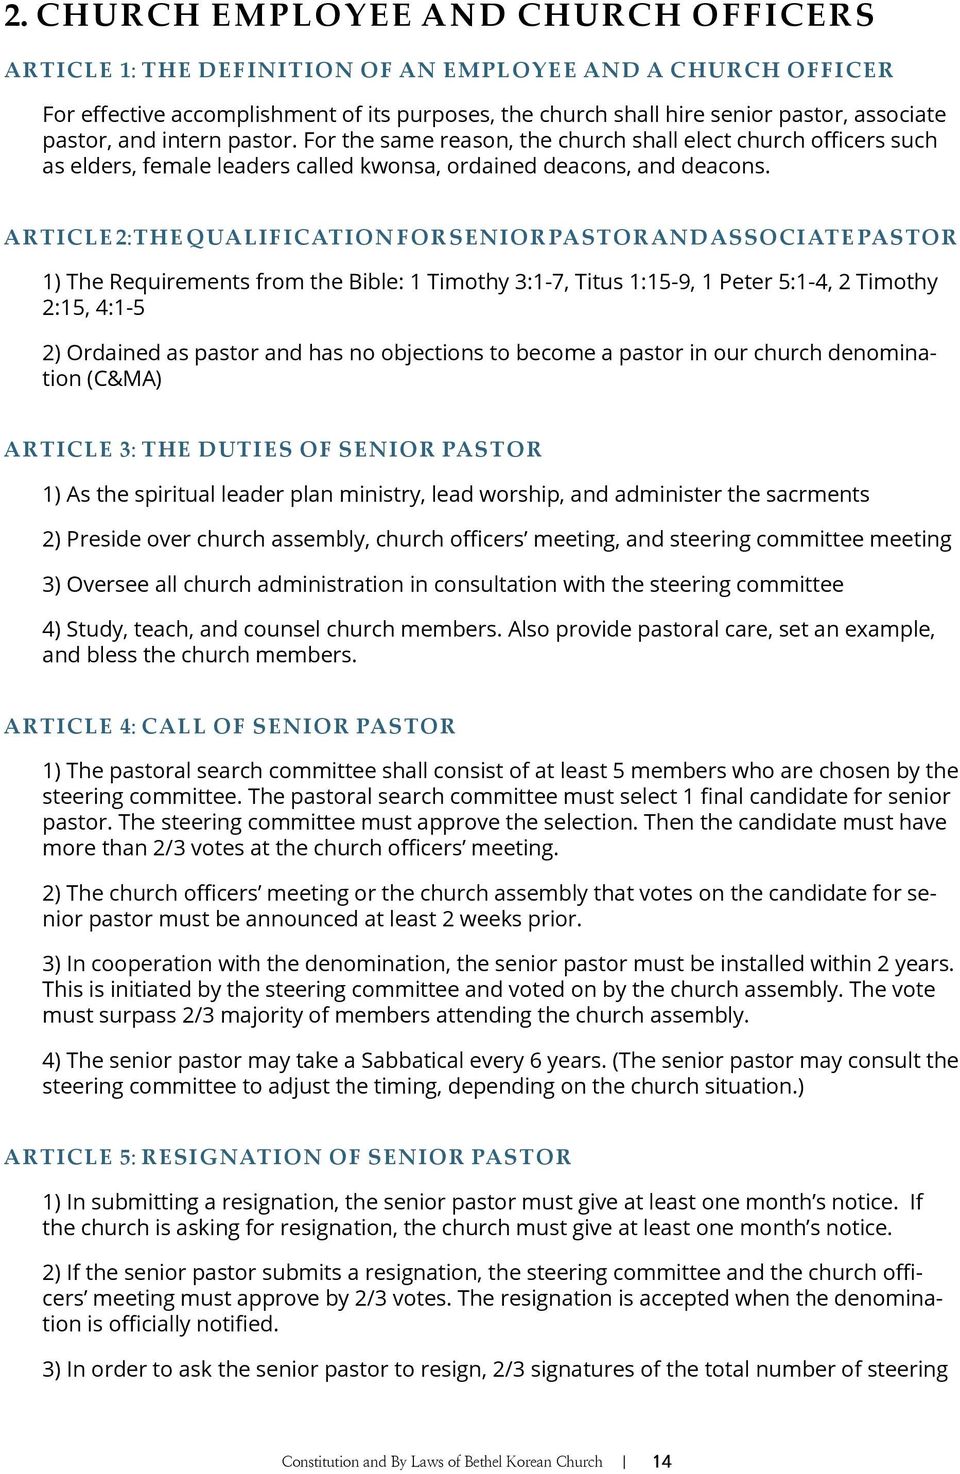 Article 2: The Qualification for Senior Pastor and Associate Pastor 1) The Requirements from the Bible: 1 Timothy 3:1-7, Titus 1:15-9, 1 Peter 5:1-4, 2 Timothy 2:15, 4:1-5 2) Ordained as pastor and